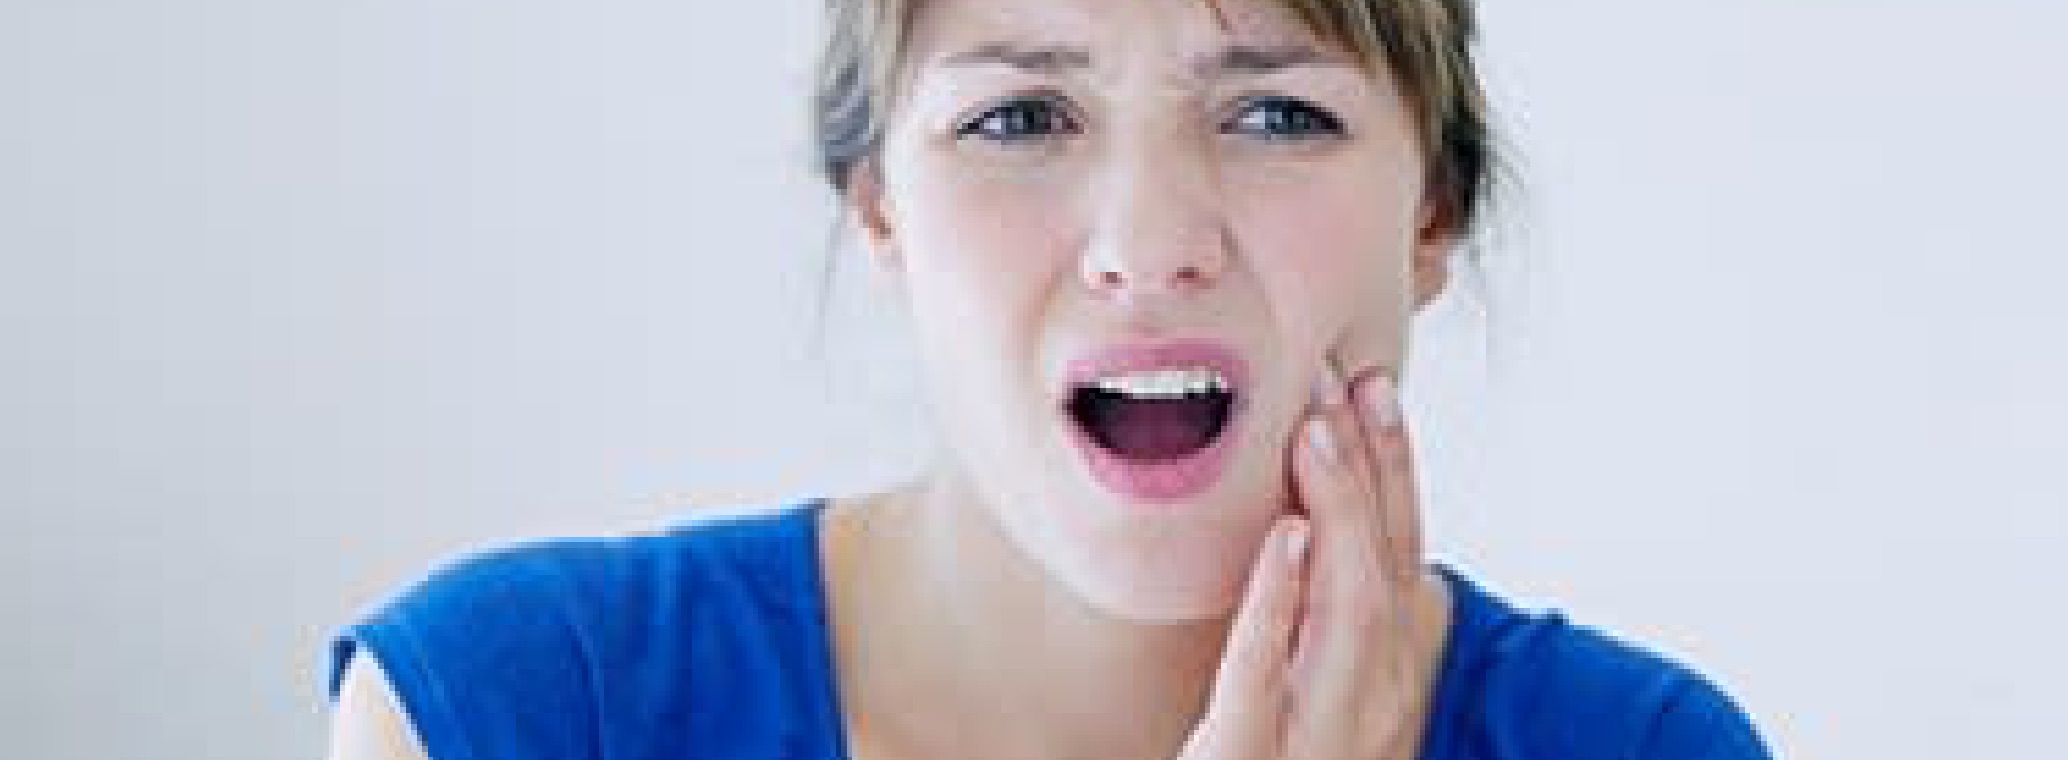 Home Remedies for Sore Teeth